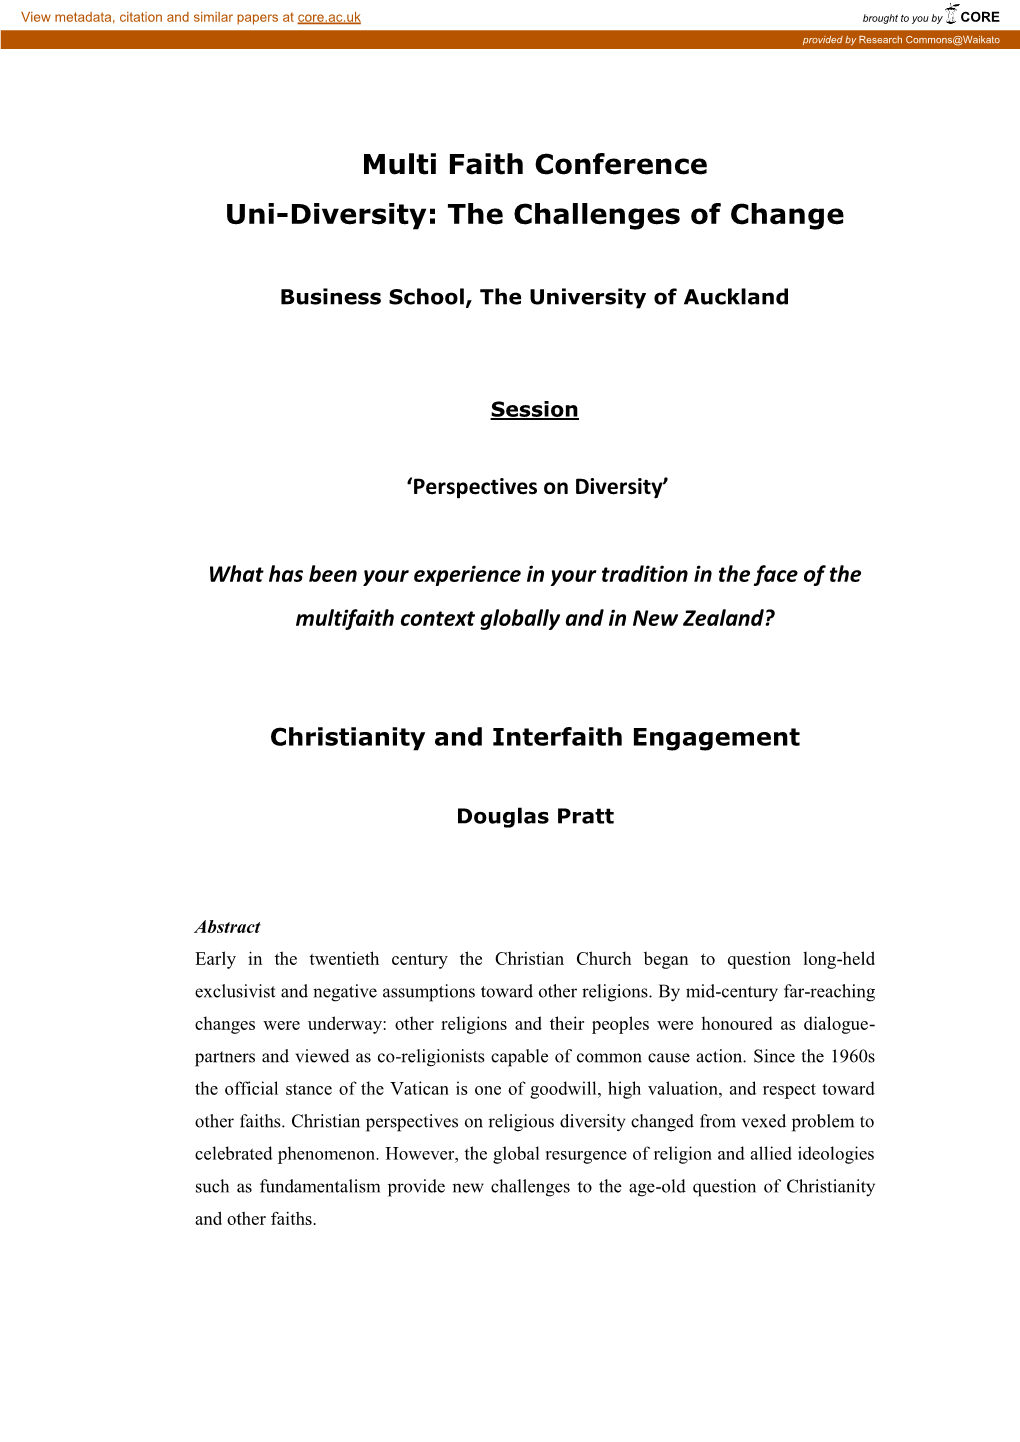 Multi Faith Conference Uni-Diversity: the Challenges of Change